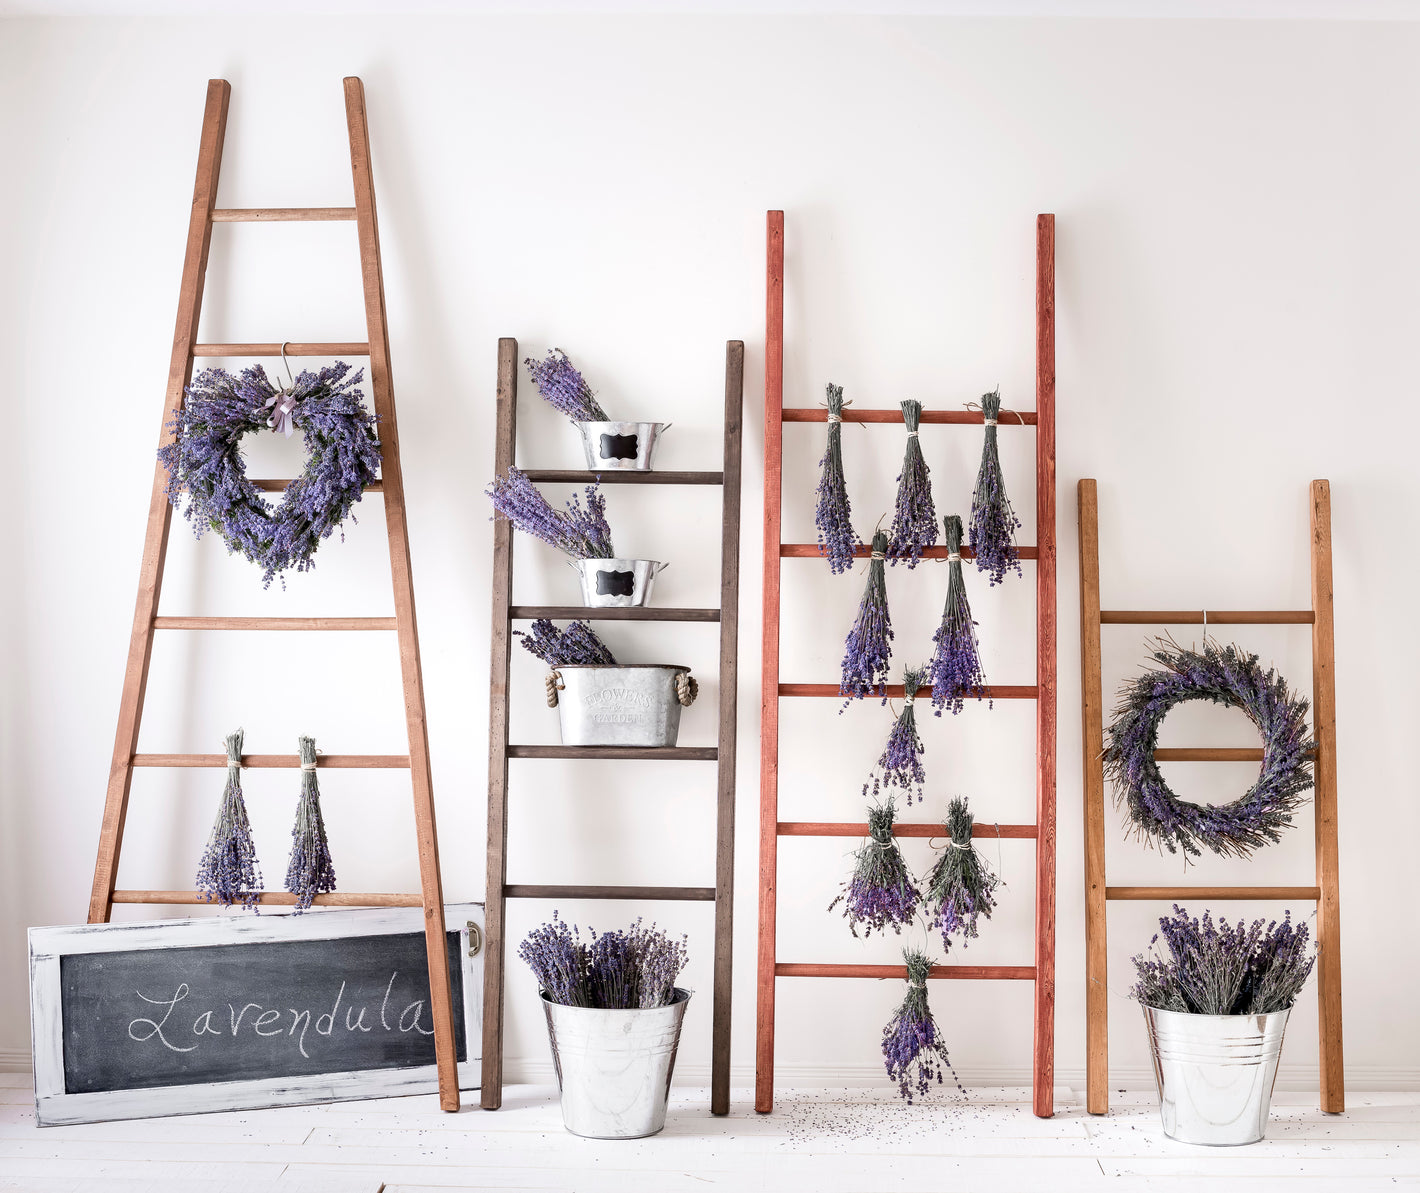 Milk Paint wood stained ladders against the wall with buckets of lavender